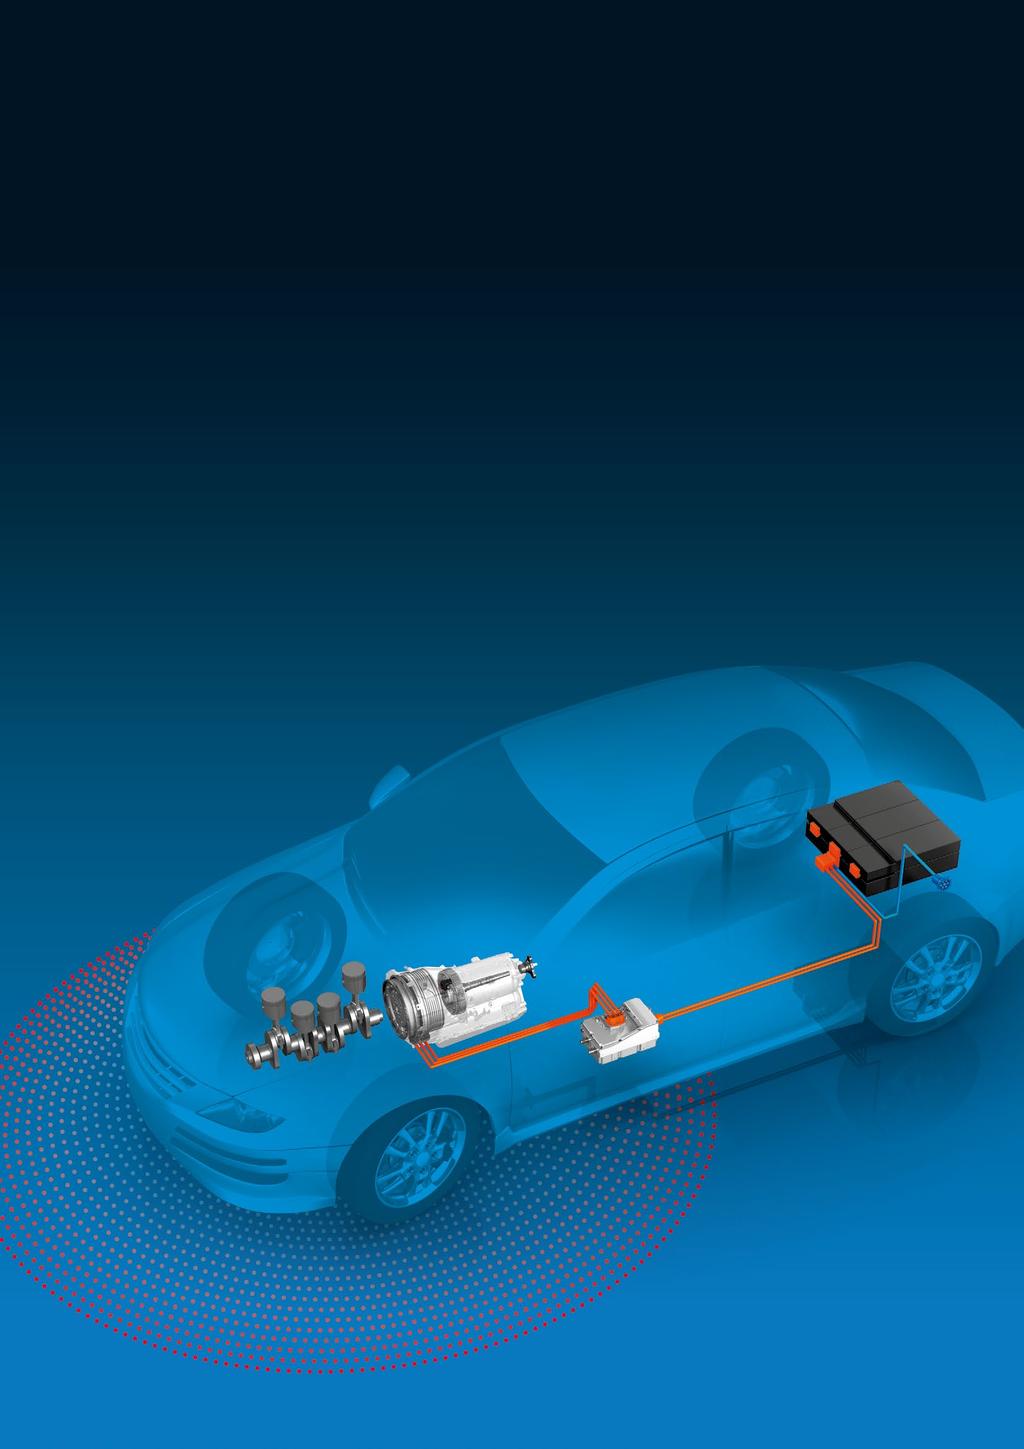 Innovative and fit for the future Millions of people around the entire world are driving with car driveline technology from ZF today and in the future.